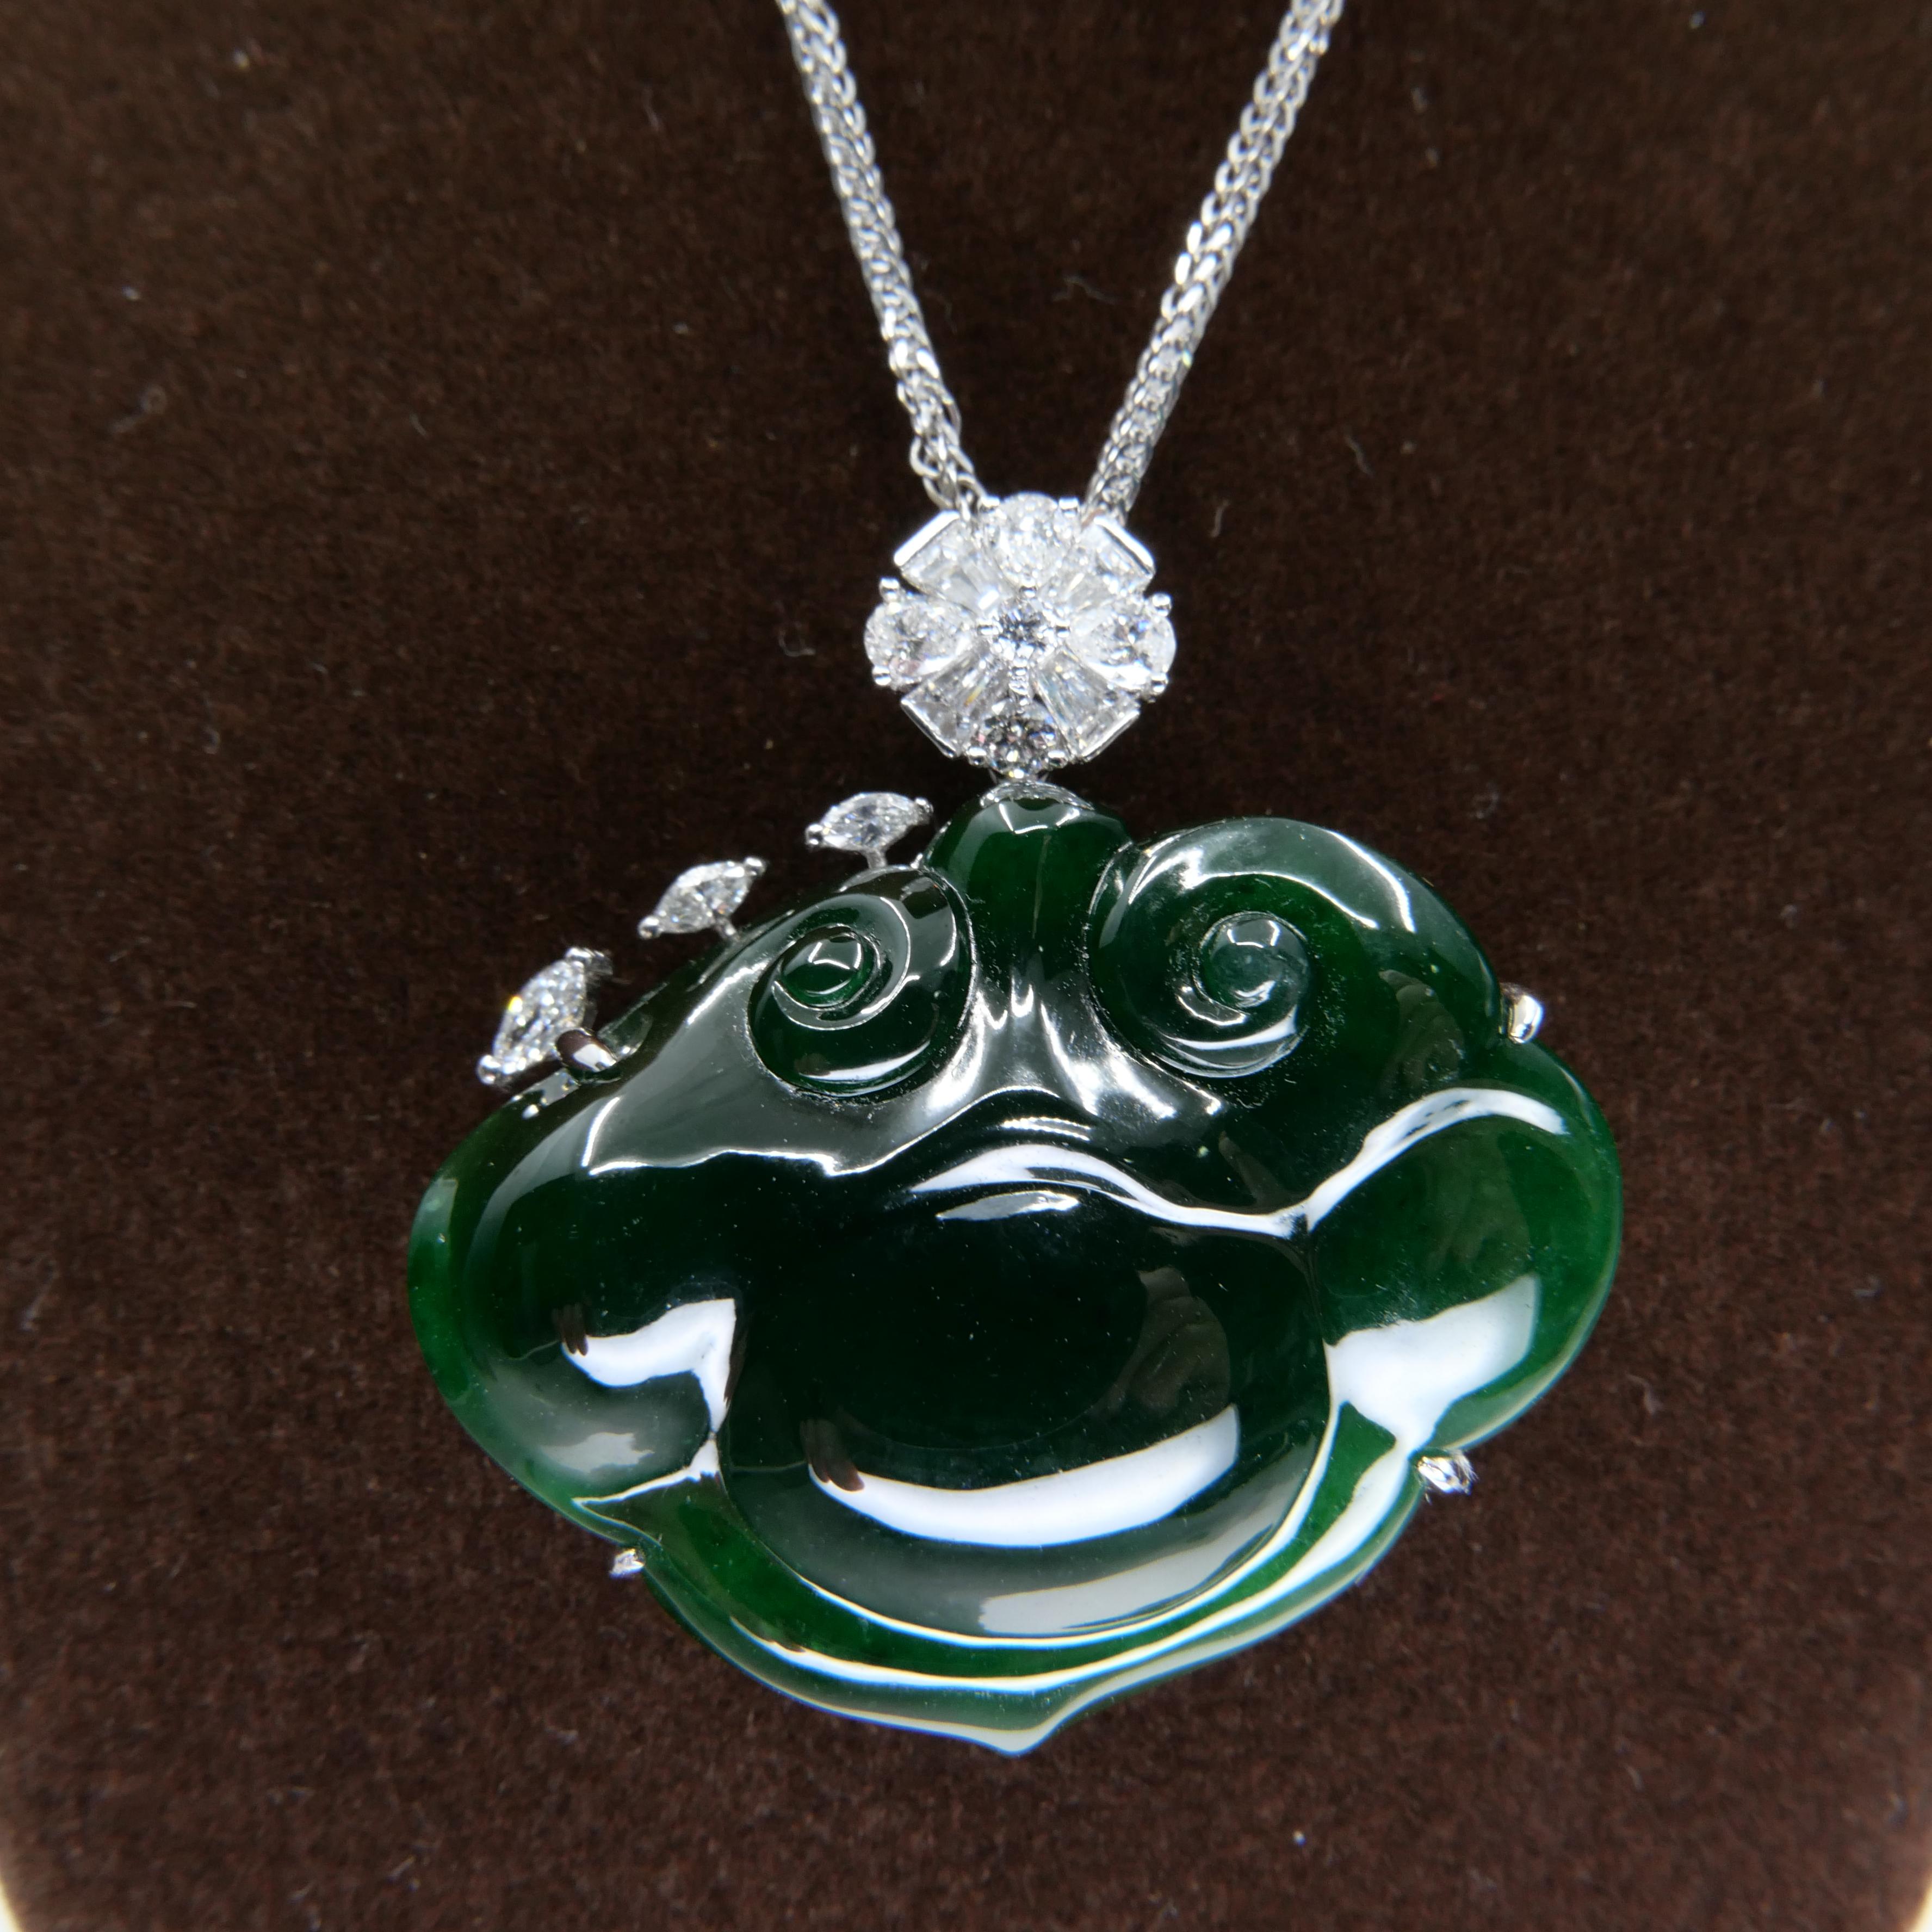 Certified Natural Carved Ruyi Jade & Diamond Pendant  Necklace. Intense Green. For Sale 3